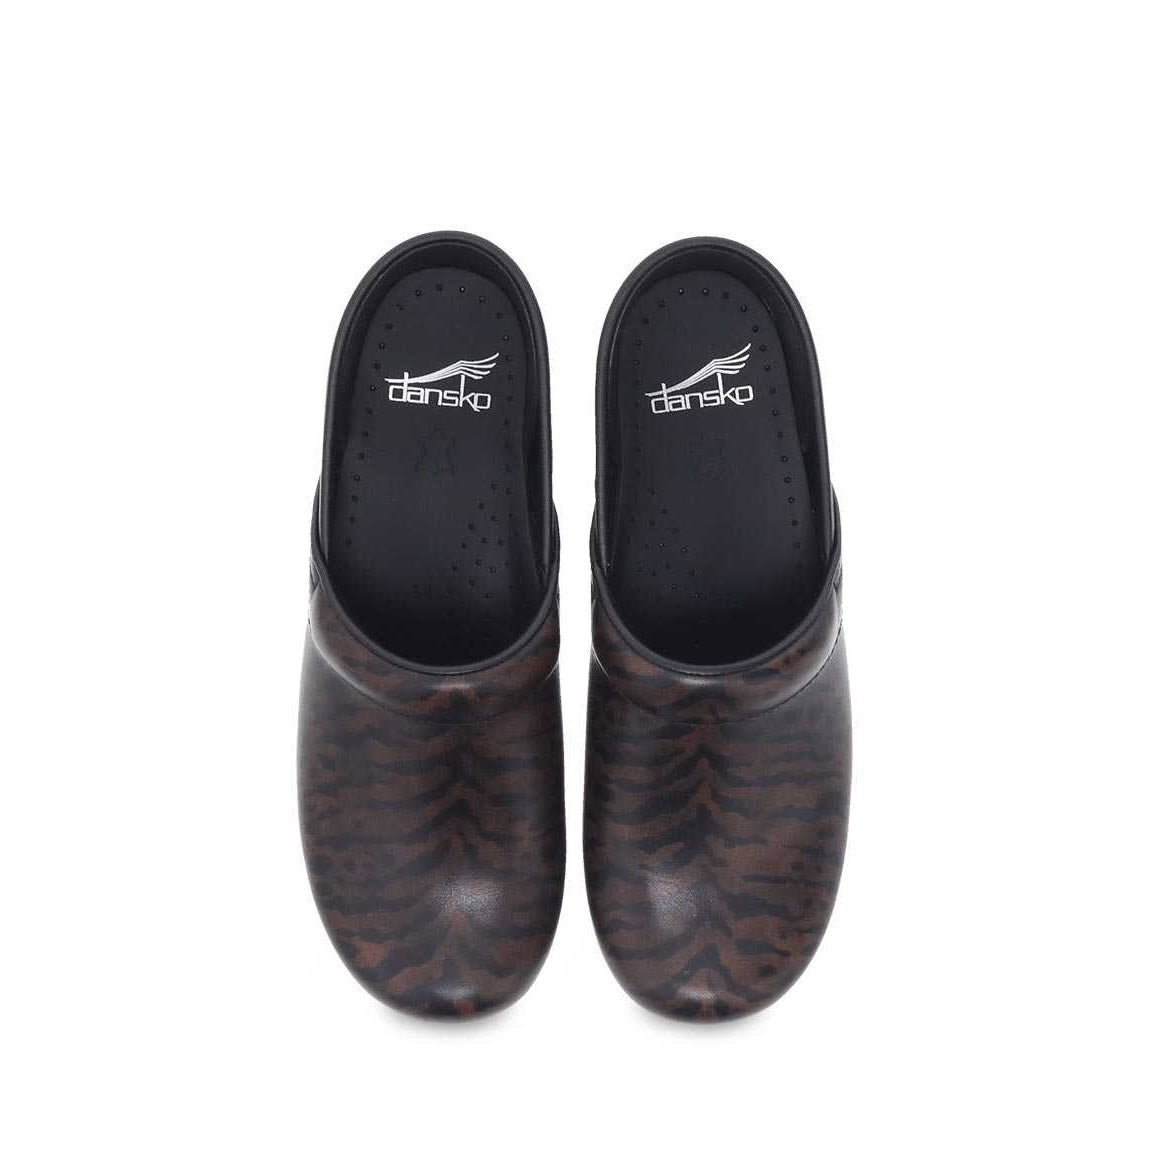 A pair of black and brown patterned Dansko Professional clogs with closed toes, insoles featuring the Dansko logo, and an anti-fatigue rocker bottom for superior comfort.

Revised: A pair of black and brown patterned DANSKO PROFESSIONAL ZEBRA BRUSH OFF - WOMENS from Dansko with closed toes, insoles featuring the Dansko logo, and an anti-fatigue rocker bottom for superior comfort.